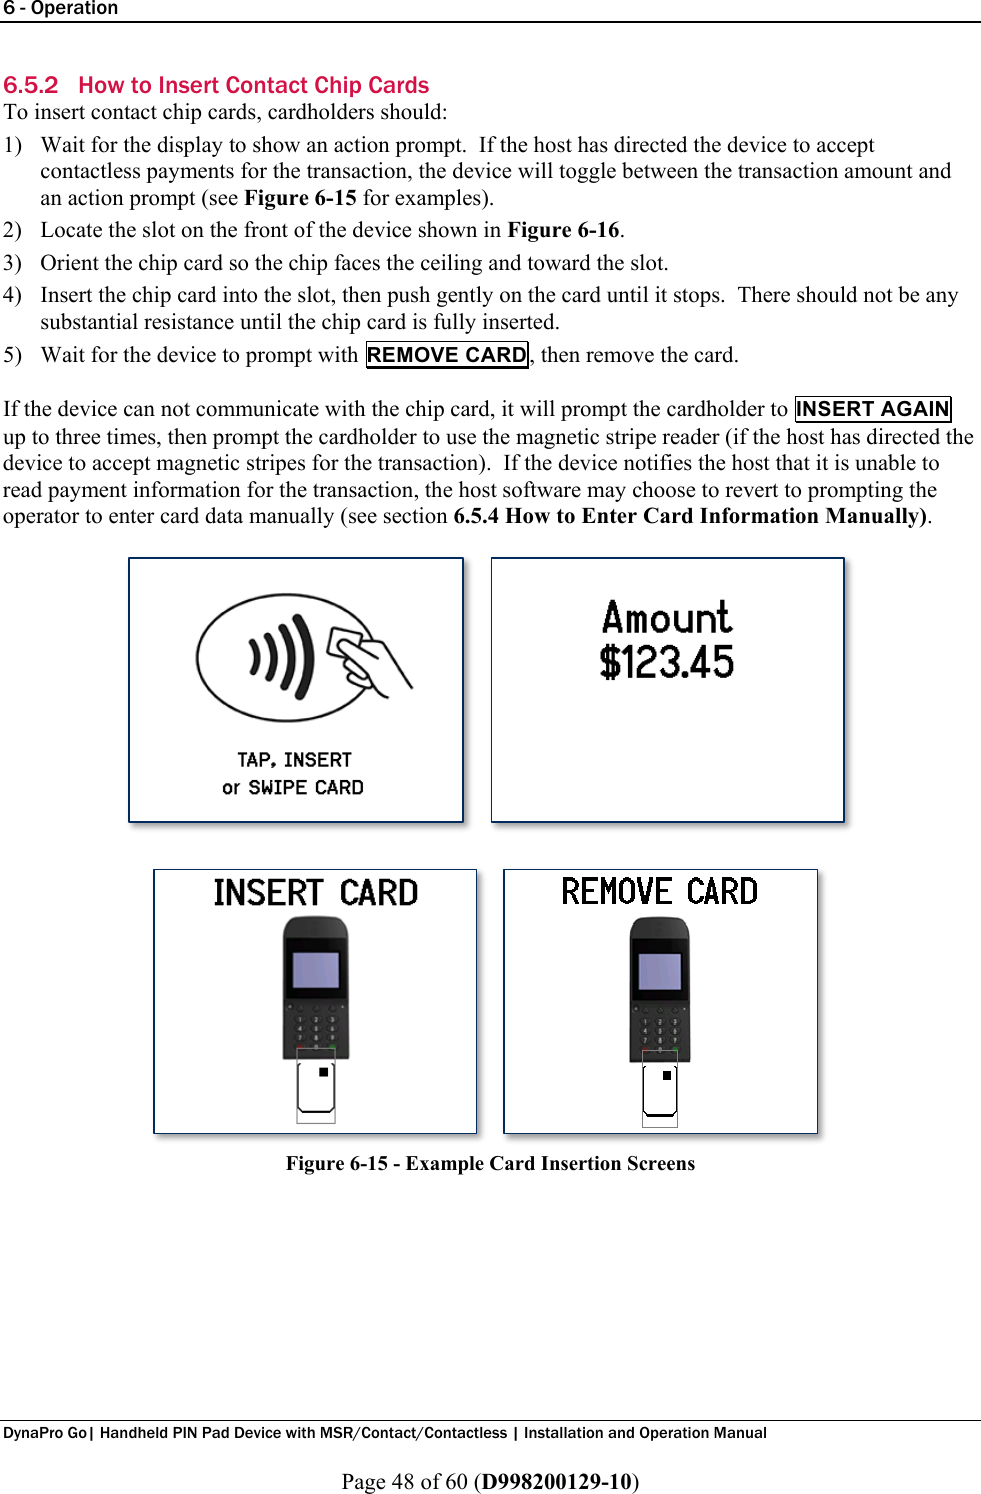 6 - Operation  DynaPro Go| Handheld PIN Pad Device with MSR/Contact/Contactless | Installation and Operation Manual  Page 48 of 60 (D998200129-10) 6.5.2 How to Insert Contact Chip Cards To insert contact chip cards, cardholders should: 1) Wait for the display to show an action prompt.  If the host has directed the device to accept contactless payments for the transaction, the device will toggle between the transaction amount and an action prompt (see Figure 6-15 for examples). 2) Locate the slot on the front of the device shown in Figure 6-16. 3) Orient the chip card so the chip faces the ceiling and toward the slot. 4) Insert the chip card into the slot, then push gently on the card until it stops.  There should not be any substantial resistance until the chip card is fully inserted. 5) Wait for the device to prompt with REMOVE CARD, then remove the card.  If the device can not communicate with the chip card, it will prompt the cardholder to INSERT AGAIN up to three times, then prompt the cardholder to use the magnetic stripe reader (if the host has directed the device to accept magnetic stripes for the transaction).  If the device notifies the host that it is unable to read payment information for the transaction, the host software may choose to revert to prompting the operator to enter card data manually (see section 6.5.4 How to Enter Card Information Manually).   Figure 6-15 - Example Card Insertion Screens 